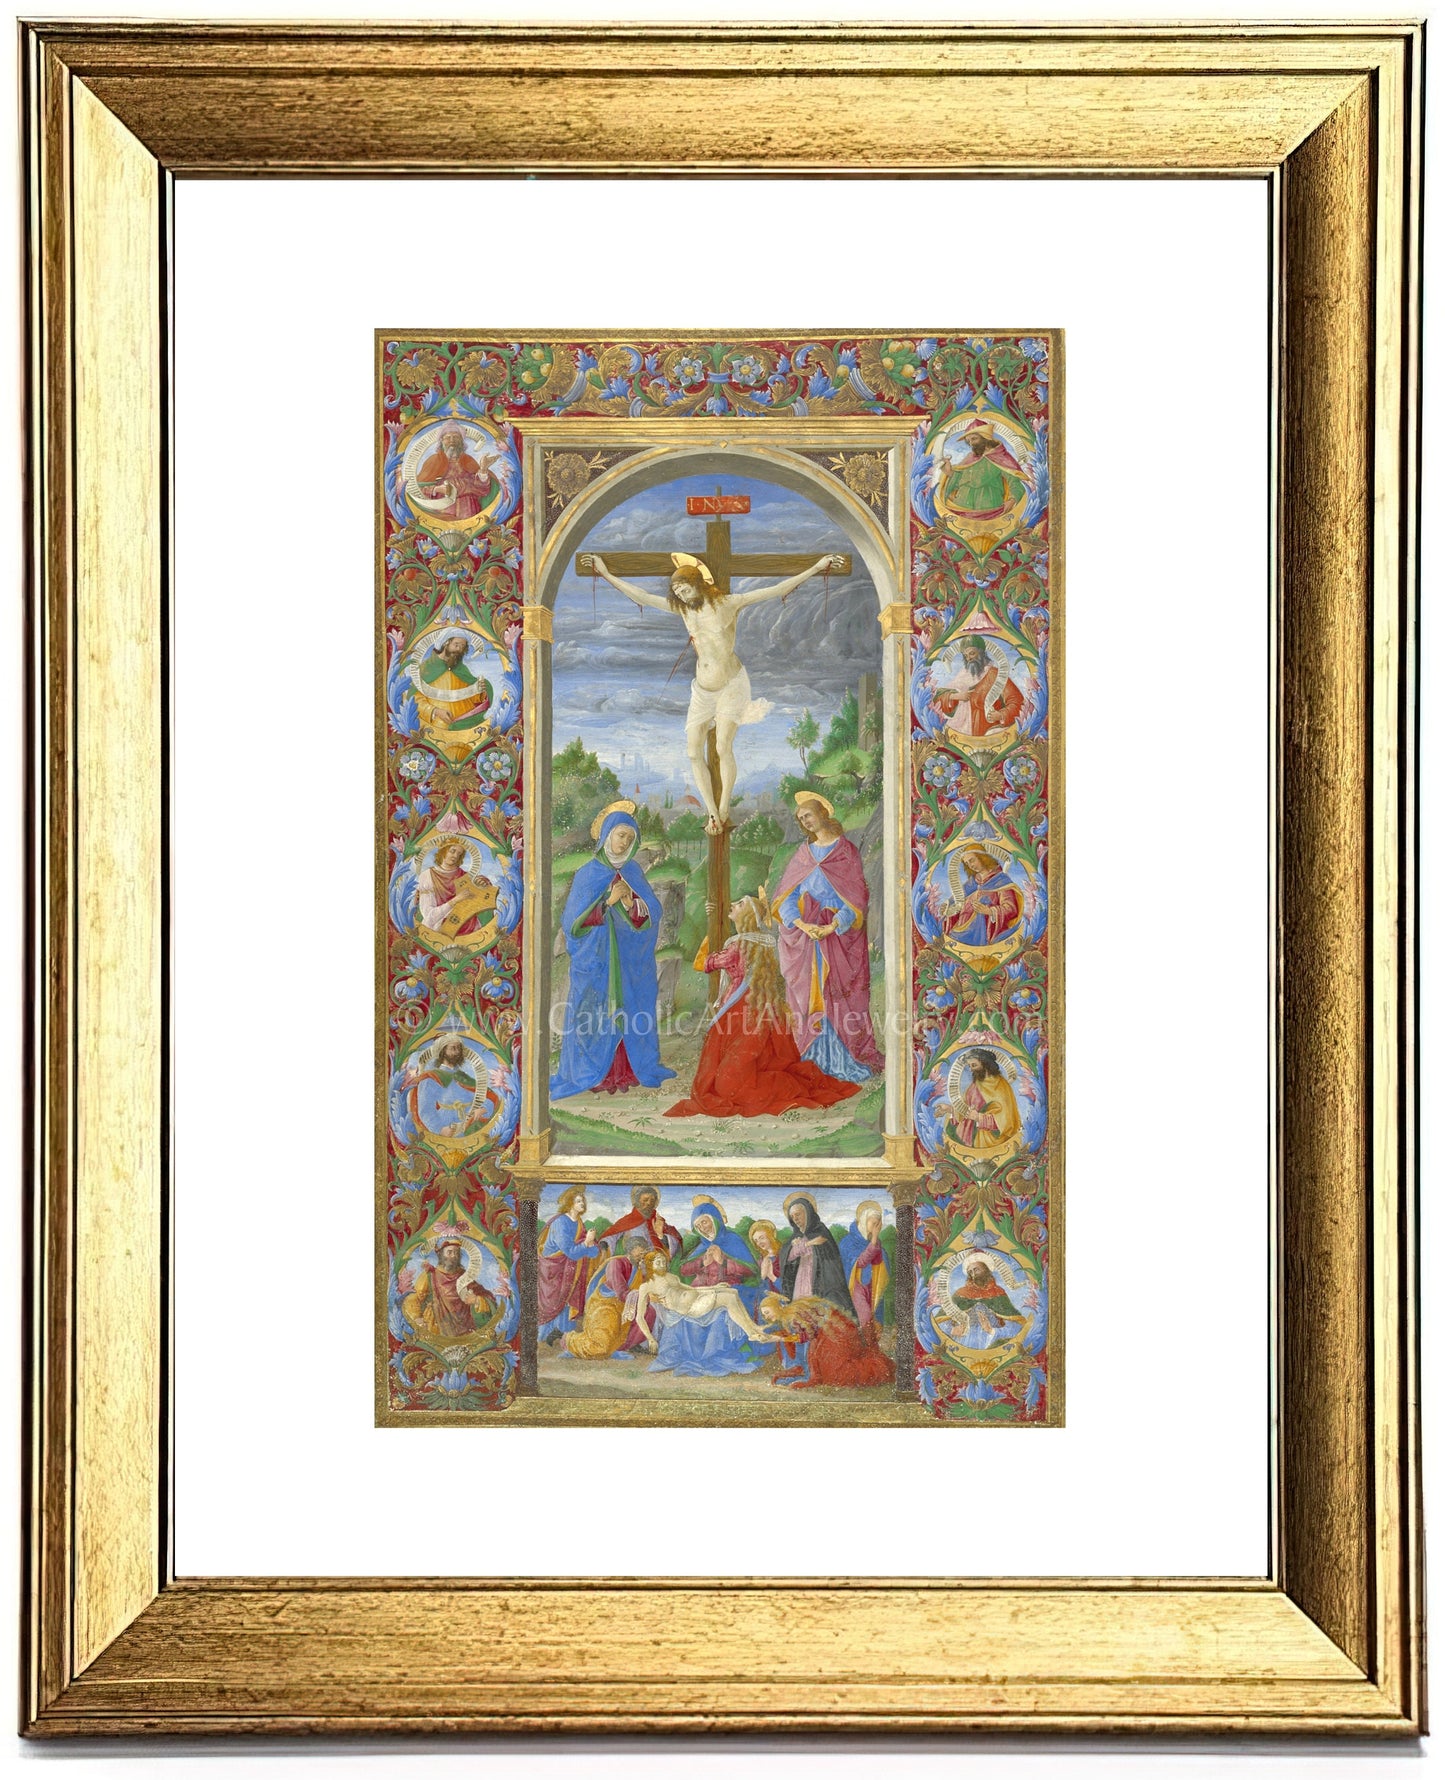 The Crucifixion – from a Missal of Pope Innocent VIII– Medieval Catholic Art Print – Archival Quality – Hi Res– Catholic Gift–Devotional Art